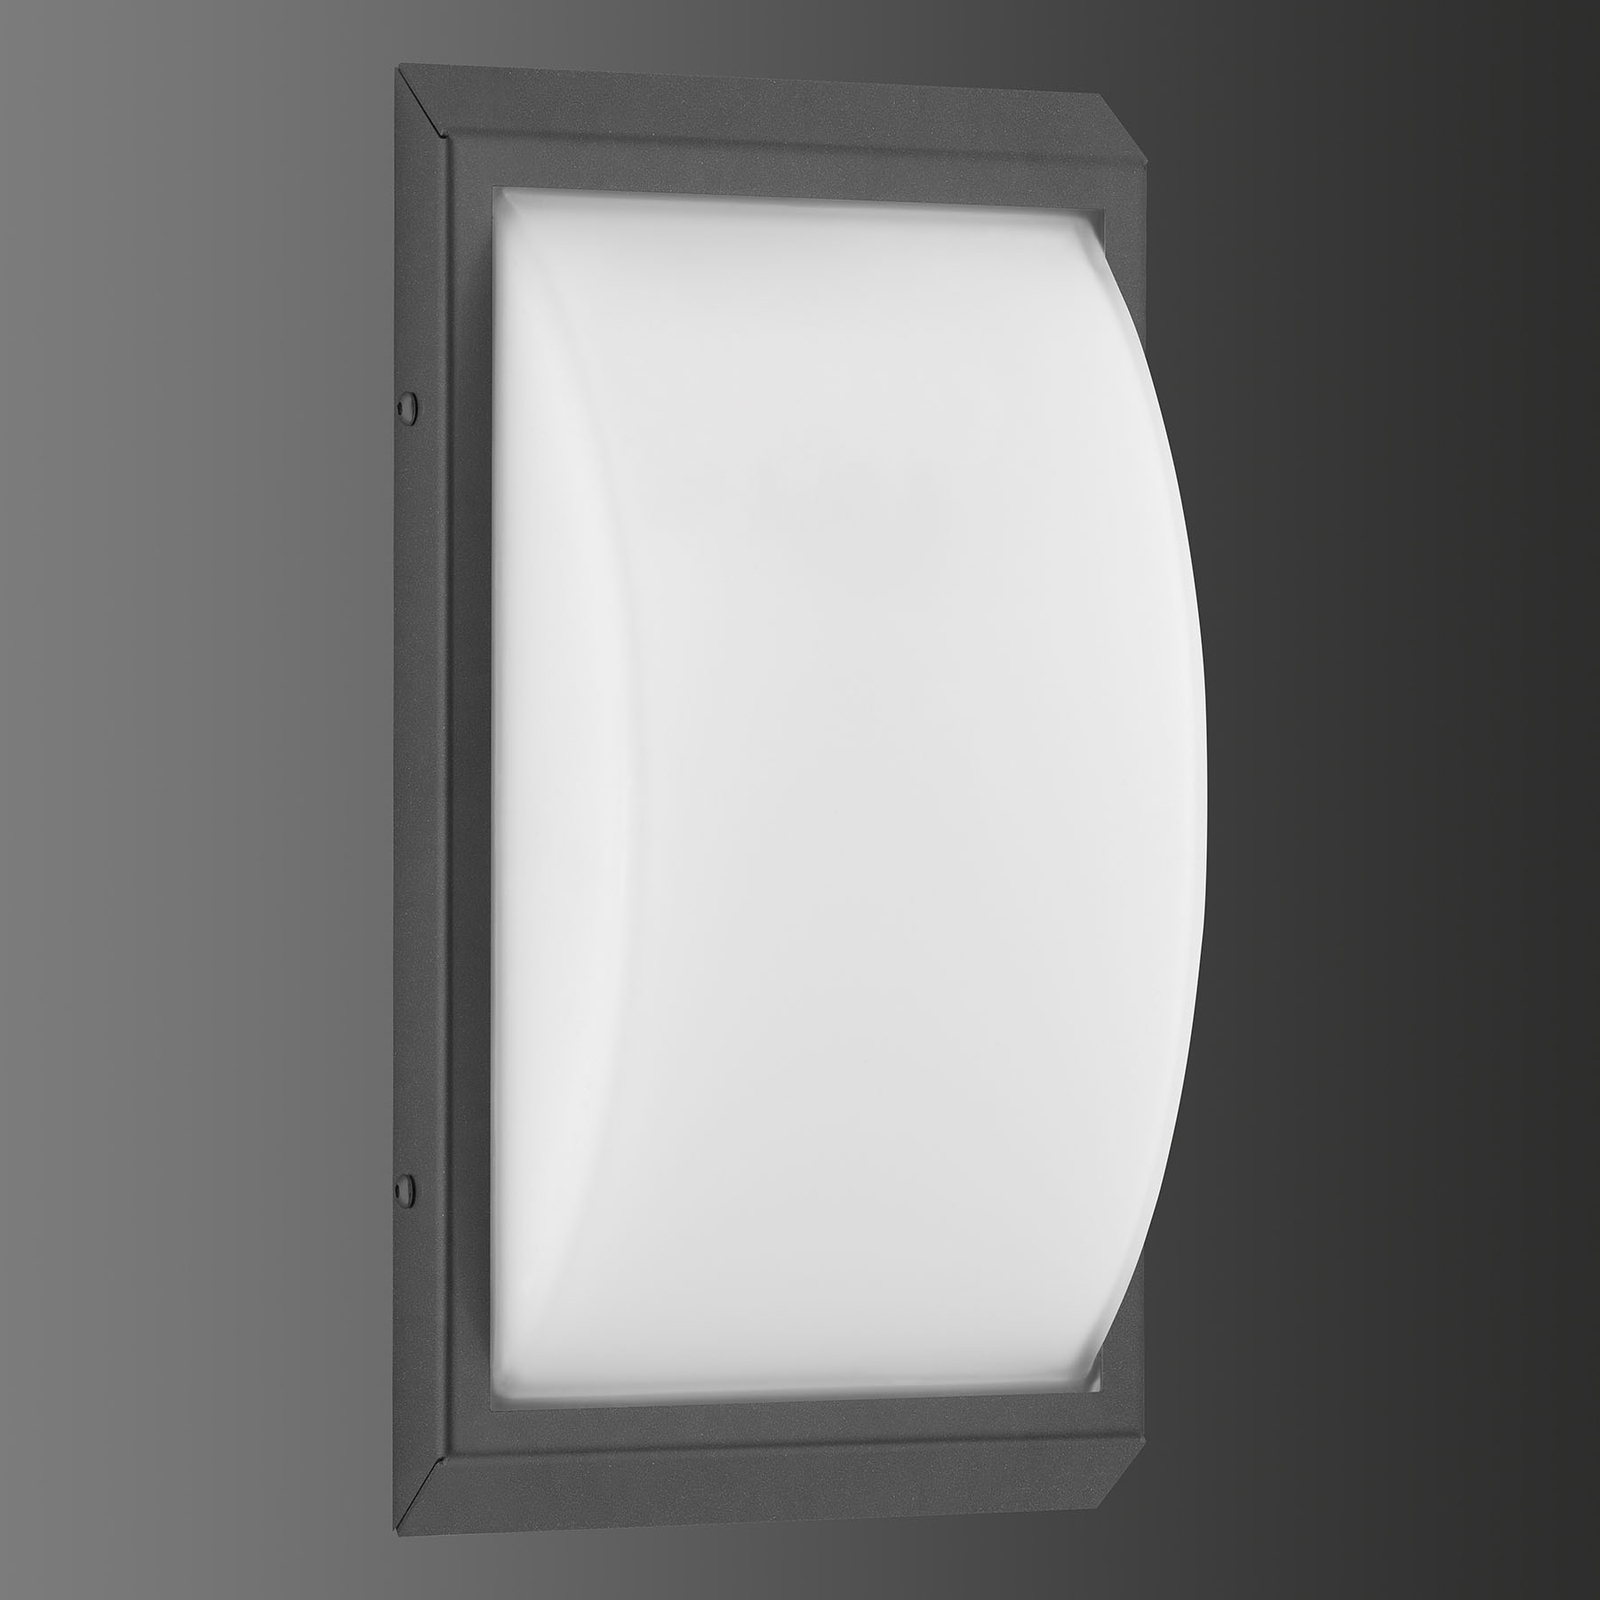 053 LED outdoor wall lamp motion detector graphite